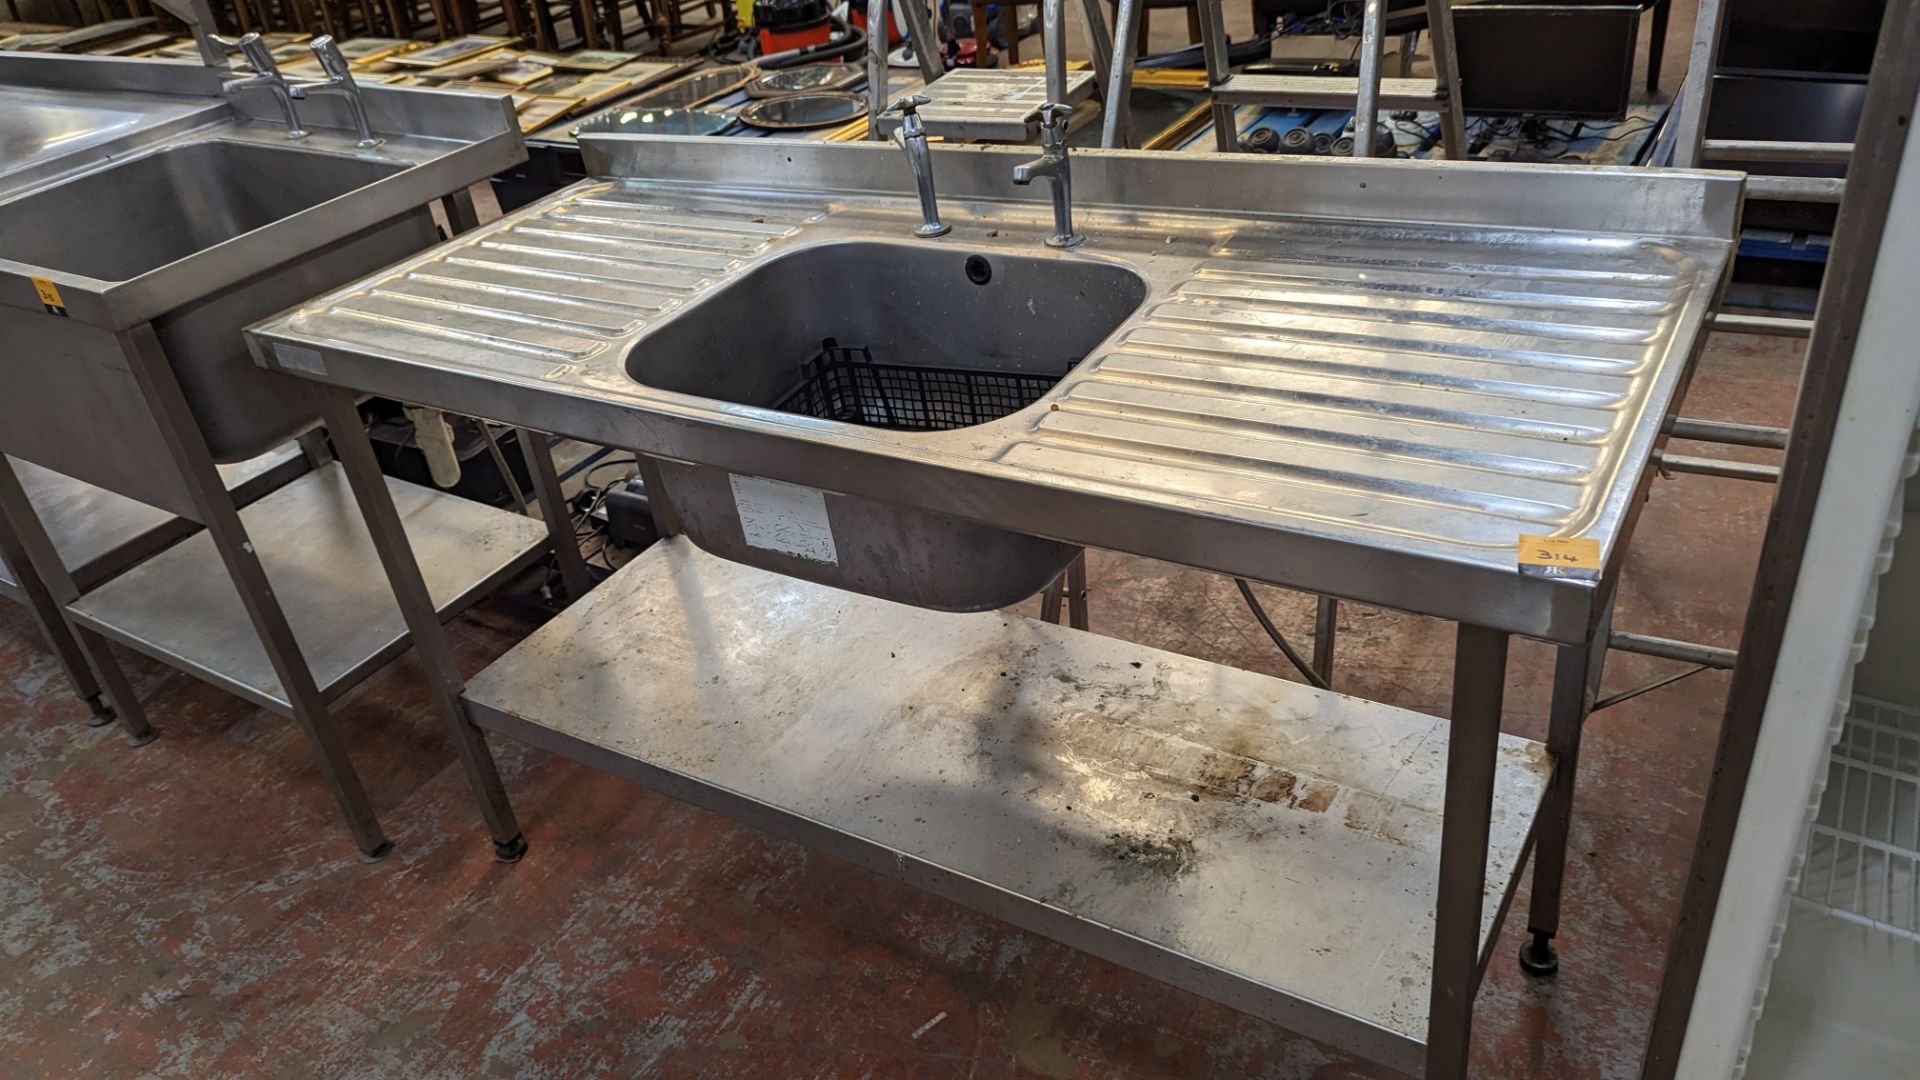 Stainless steel free standing basin arrangement with drainers to either side and shelf below